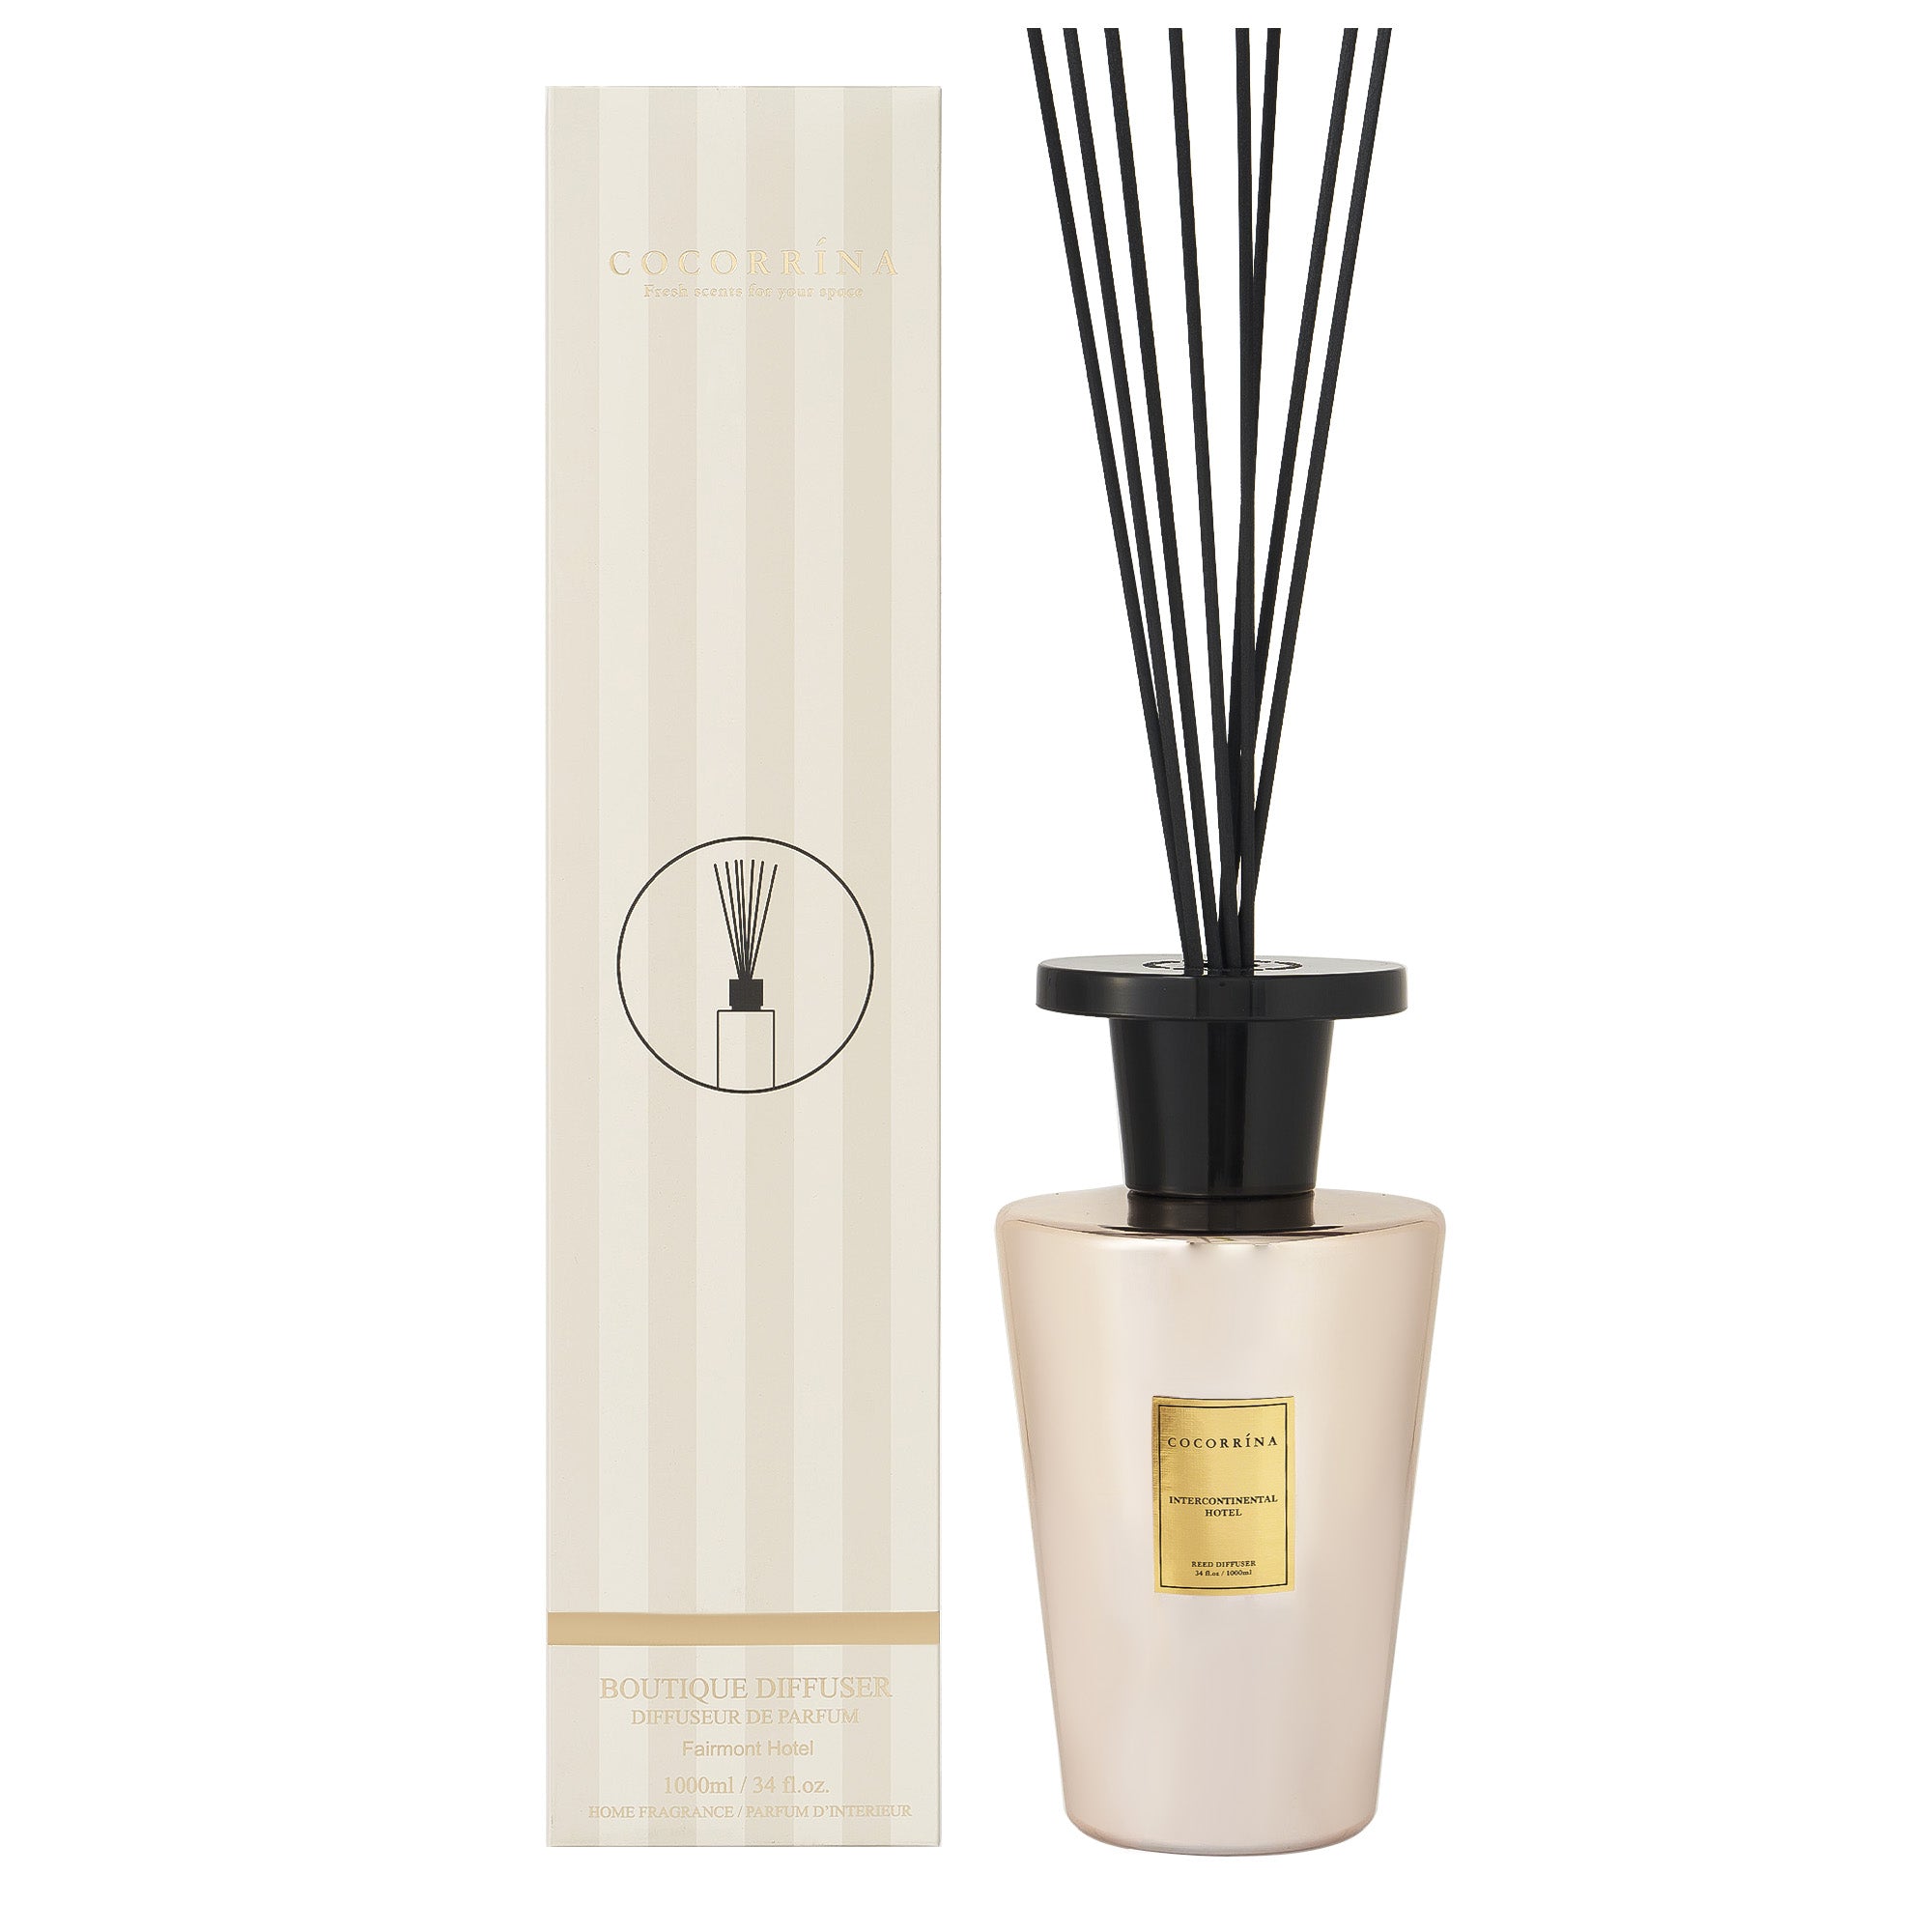 COCORRIN 1000ml Inter continental Reed Diffusor